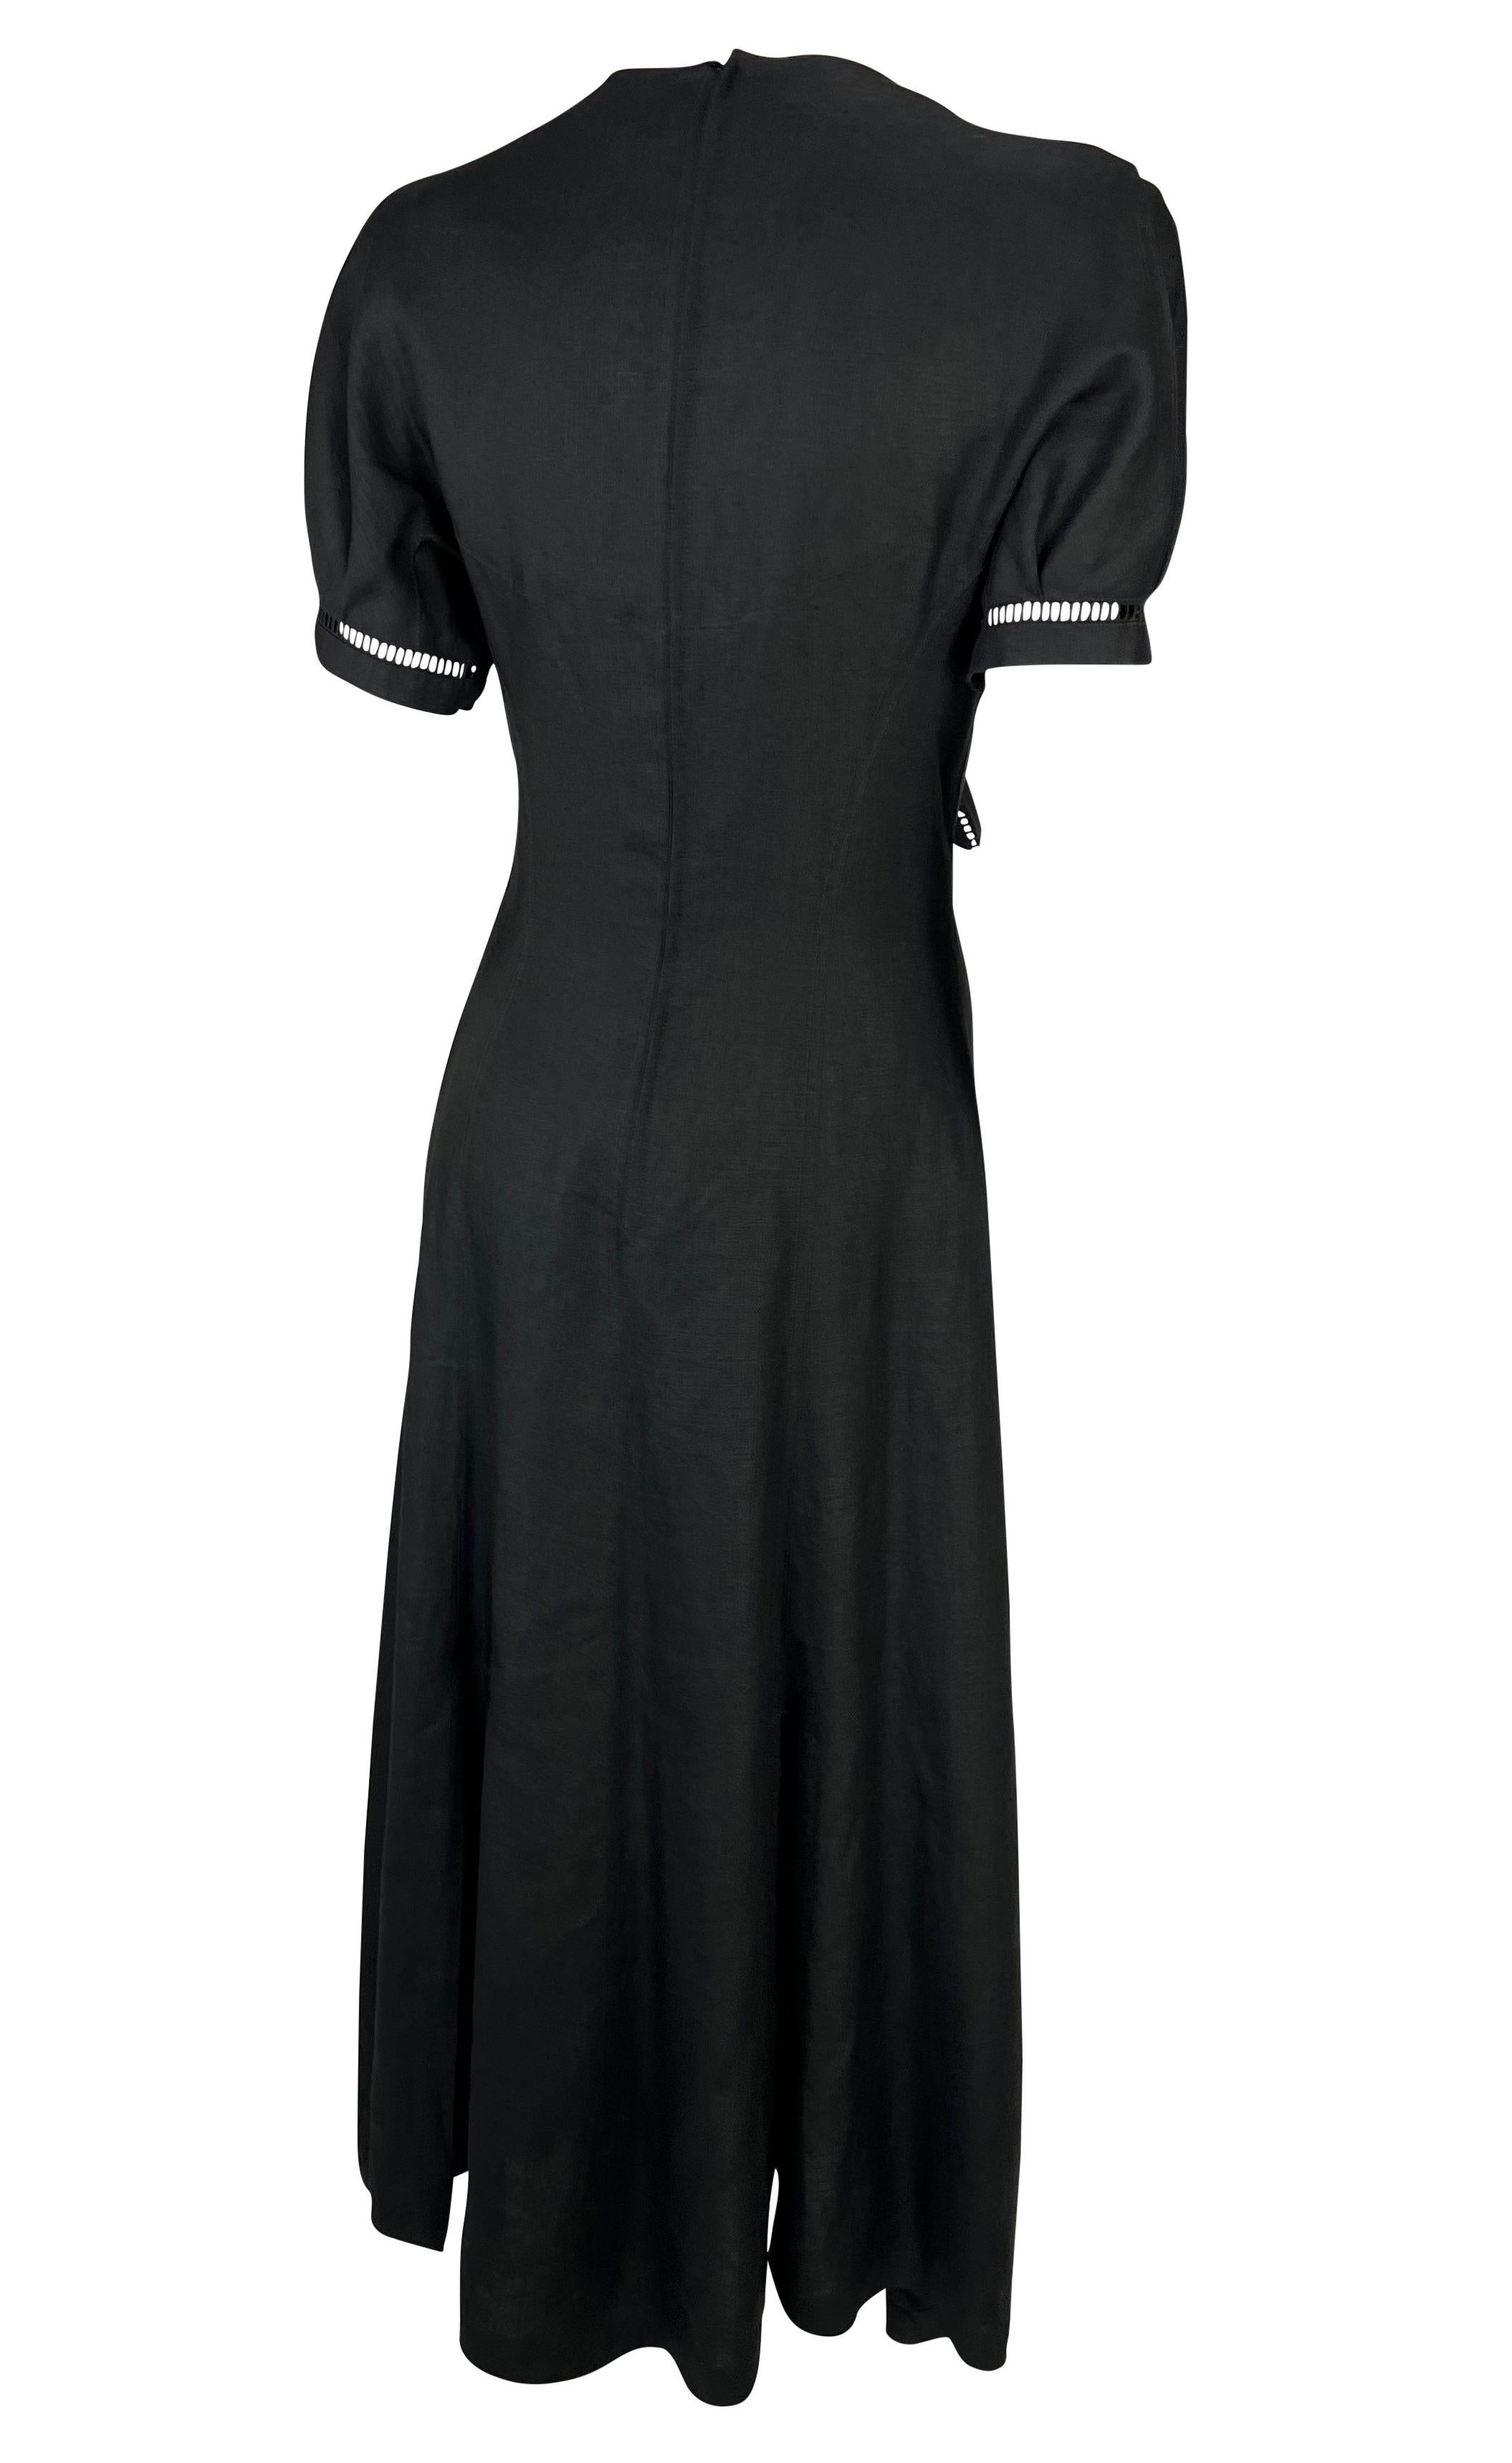 S/S 1992 Thierry Mugler Sheer Black Linen Tie Slit Maxi Flare Western Dress In Good Condition For Sale In Philadelphia, PA